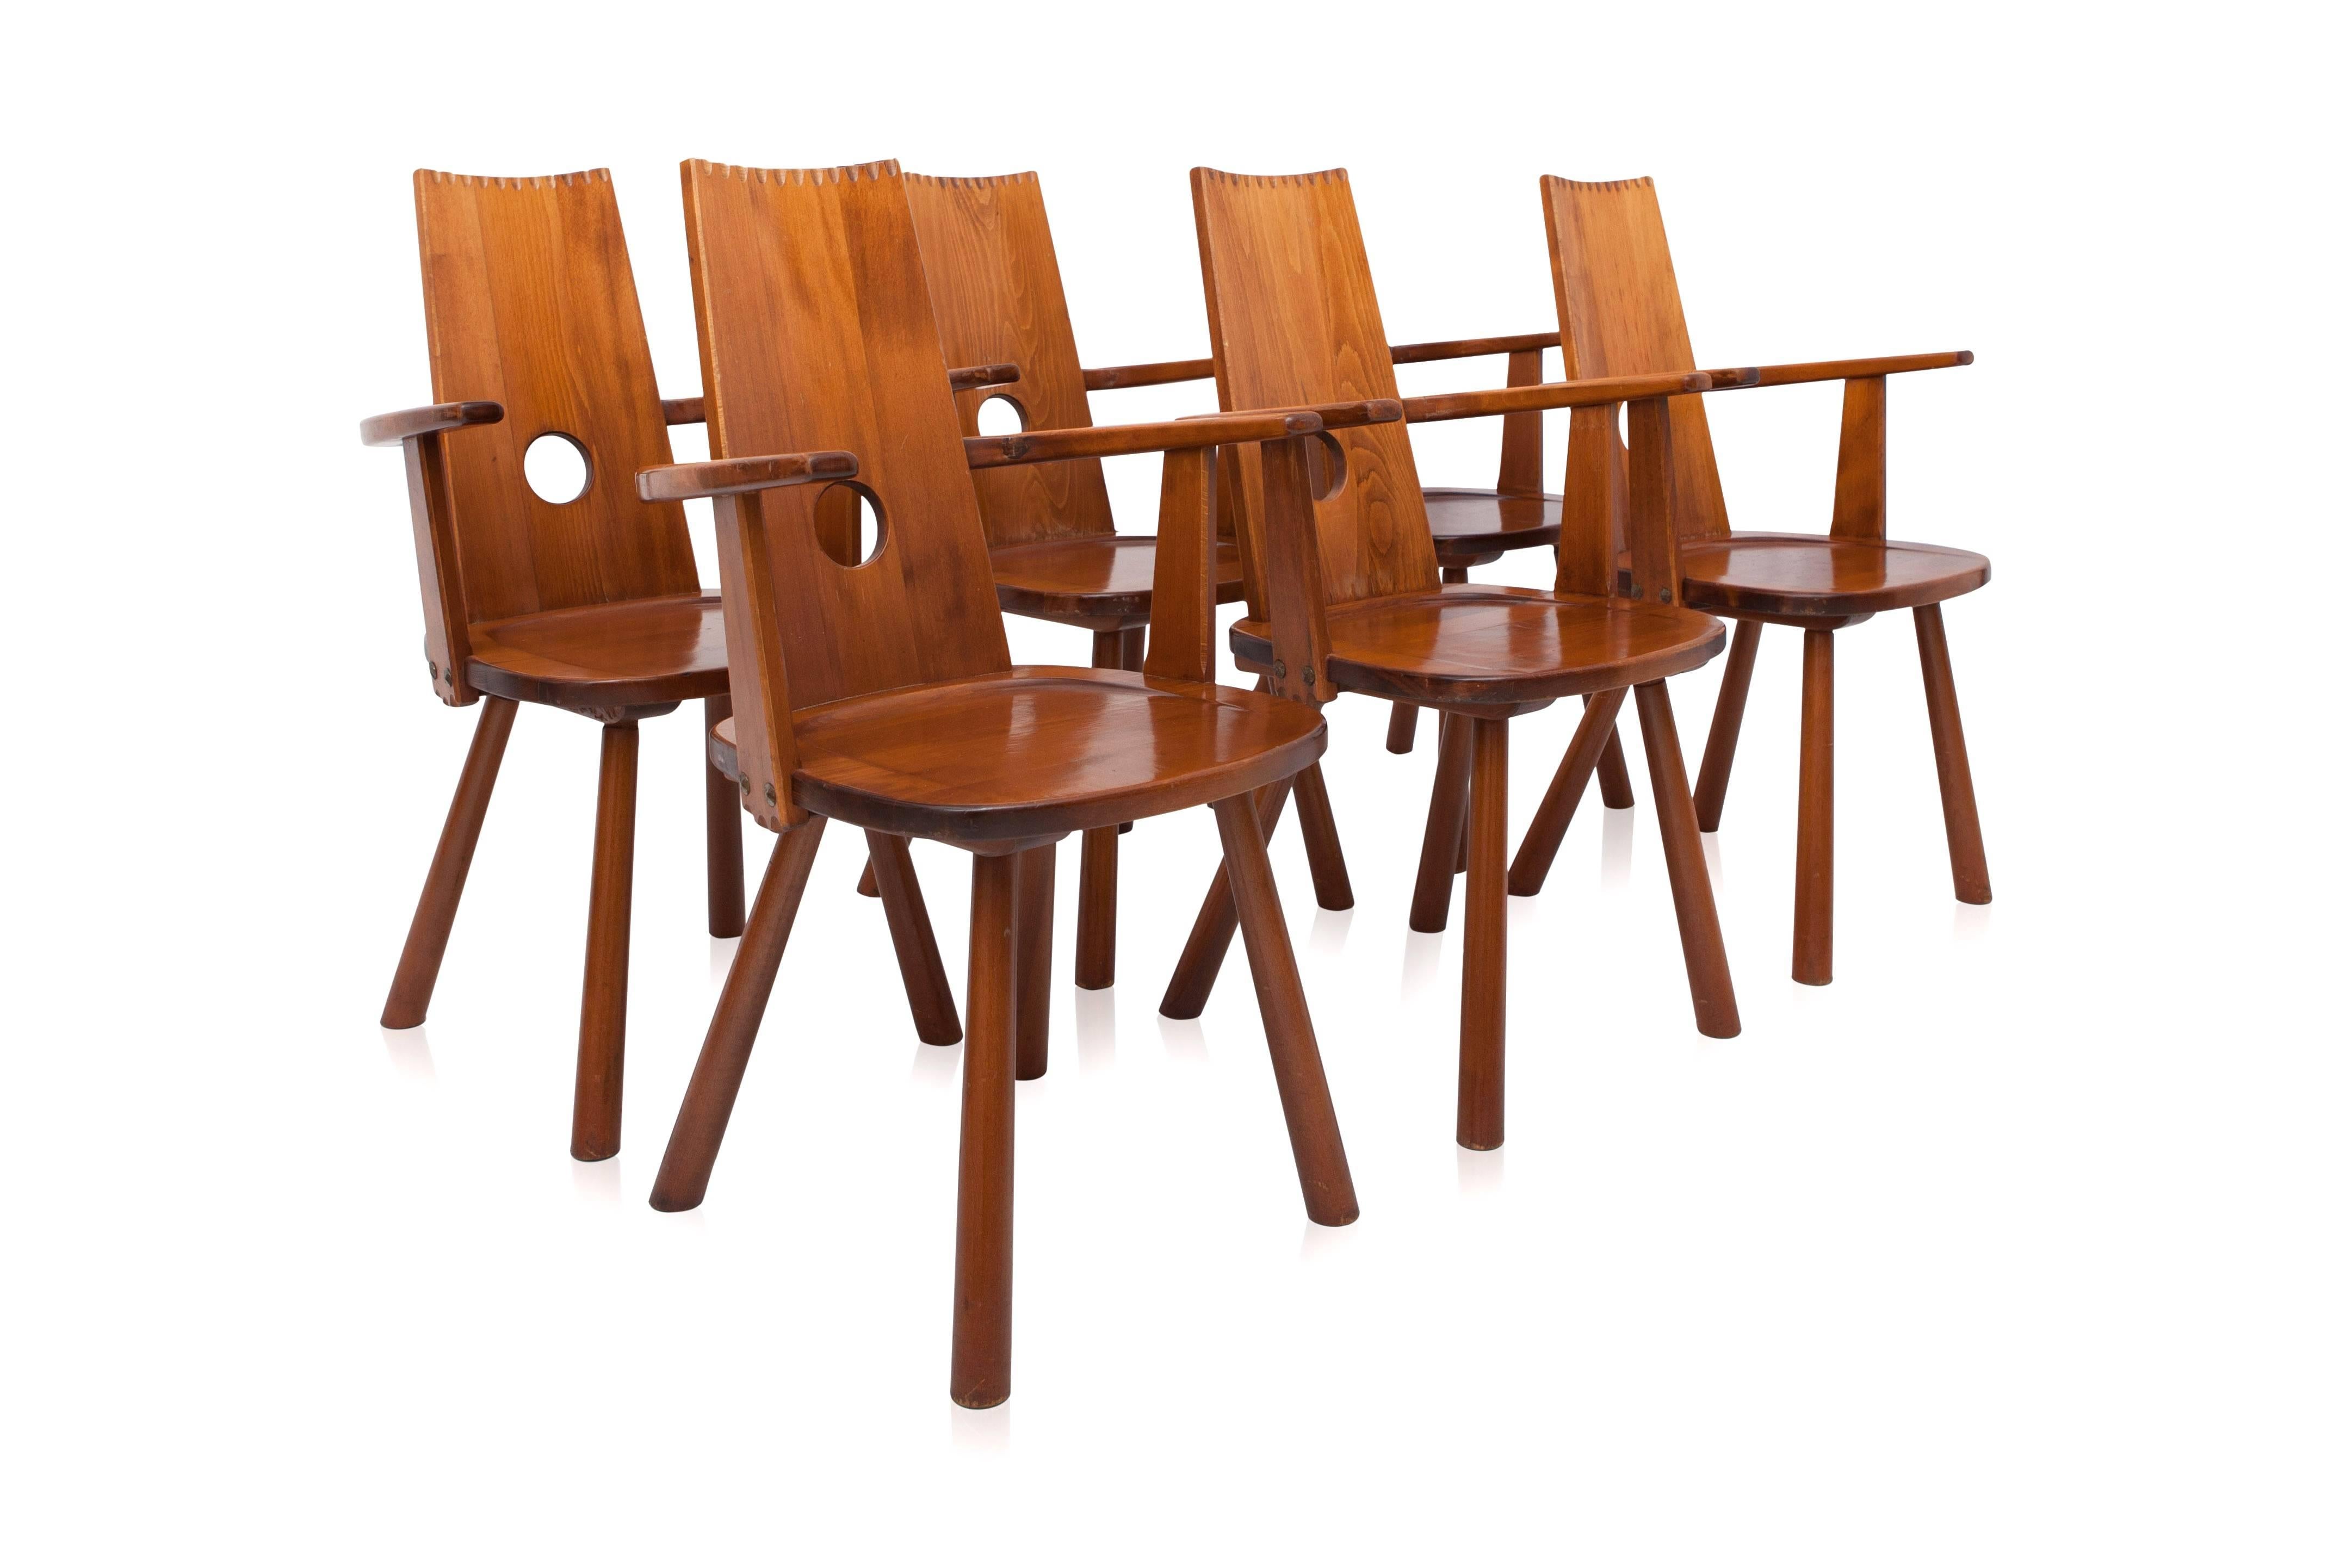 Hardwood French Mid-Century Modern Dining Chairs, set of six